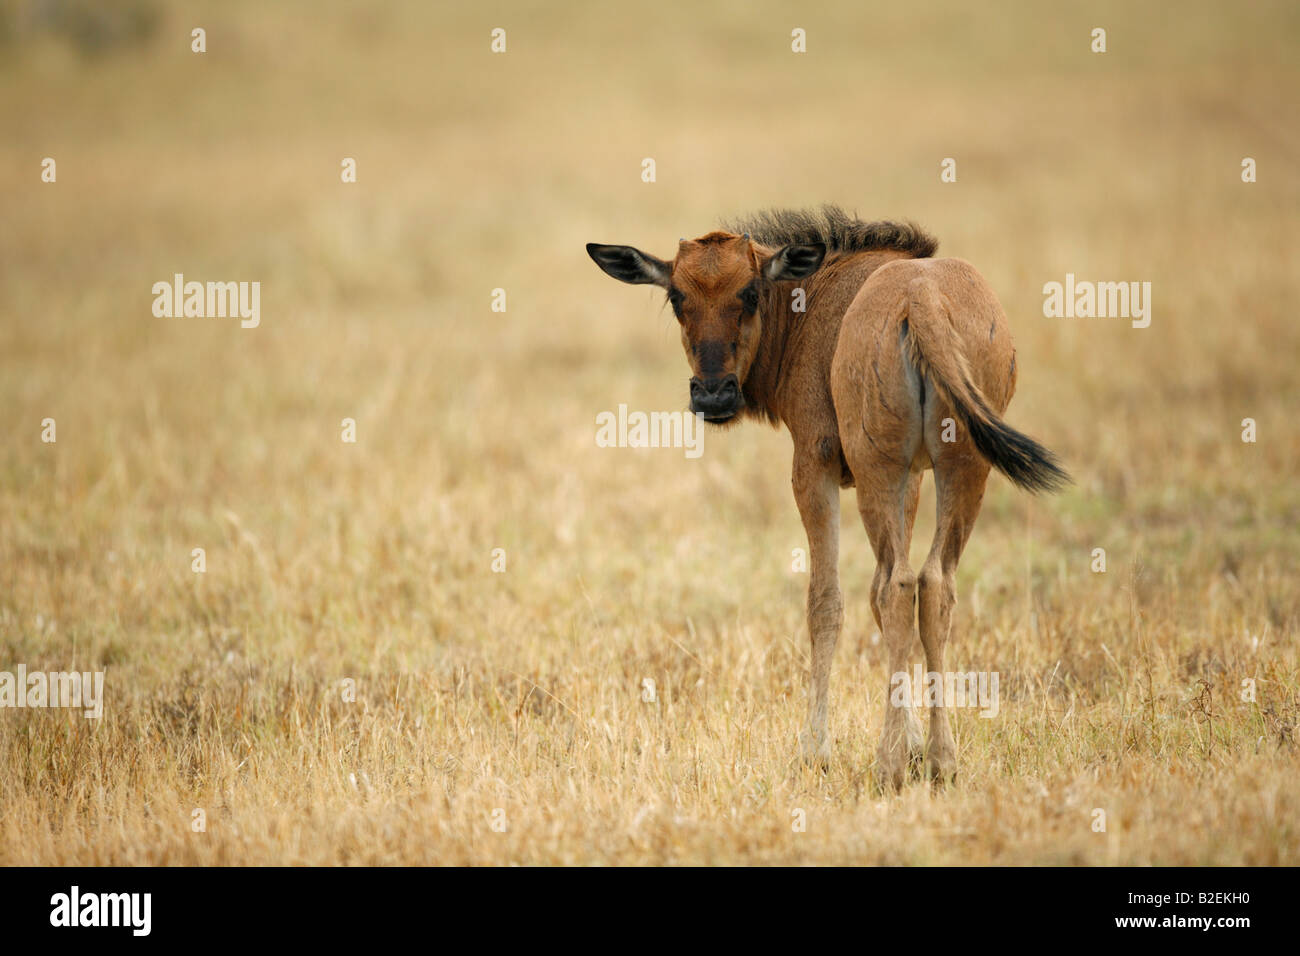 A young blue wildebeest calf looking back over its shoulder Stock Photo